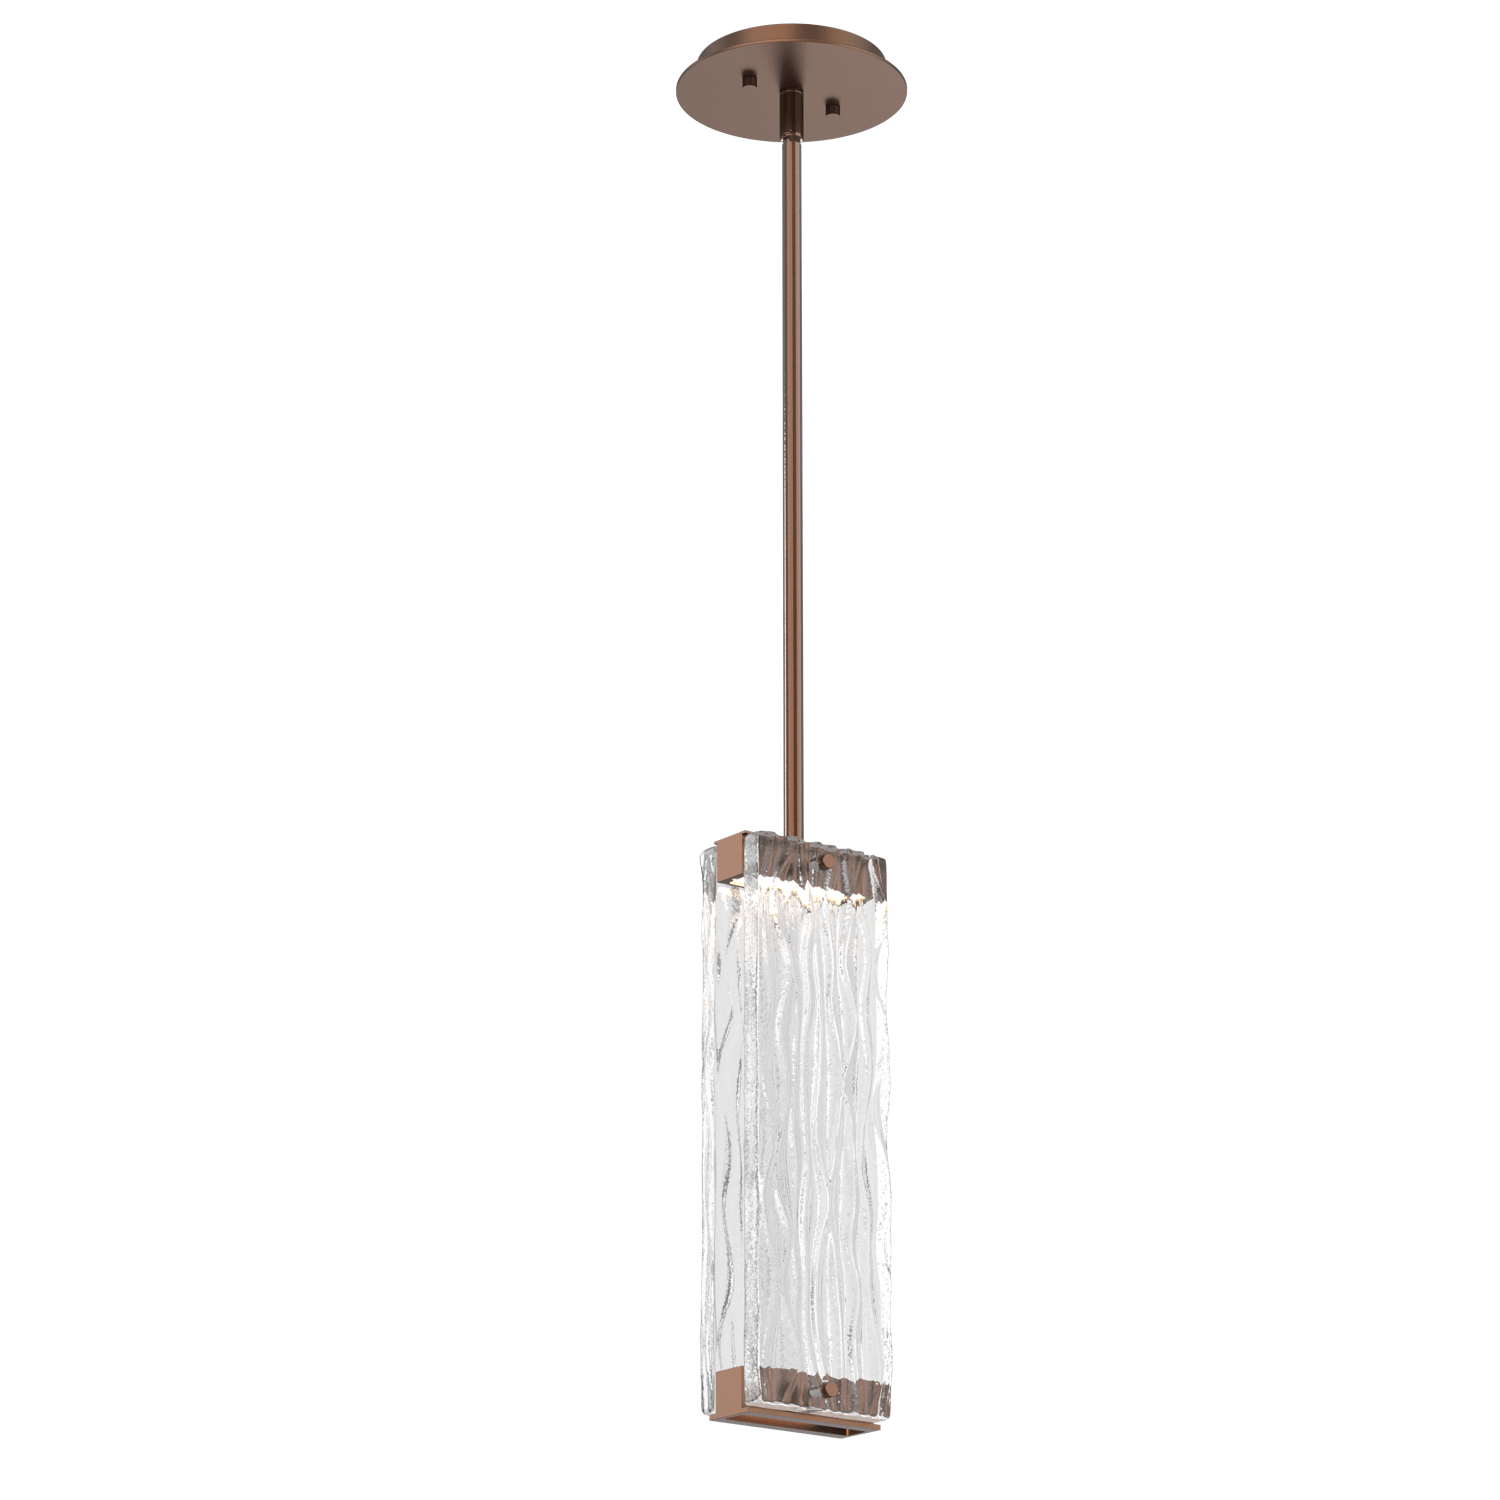 LAB0090-01-BB-TT-Hammerton-Studio-Tabulo-pendant-light-with-burnished-bronze-finish-and-clear-tidal-cast-glass-shade-and-LED-lamping